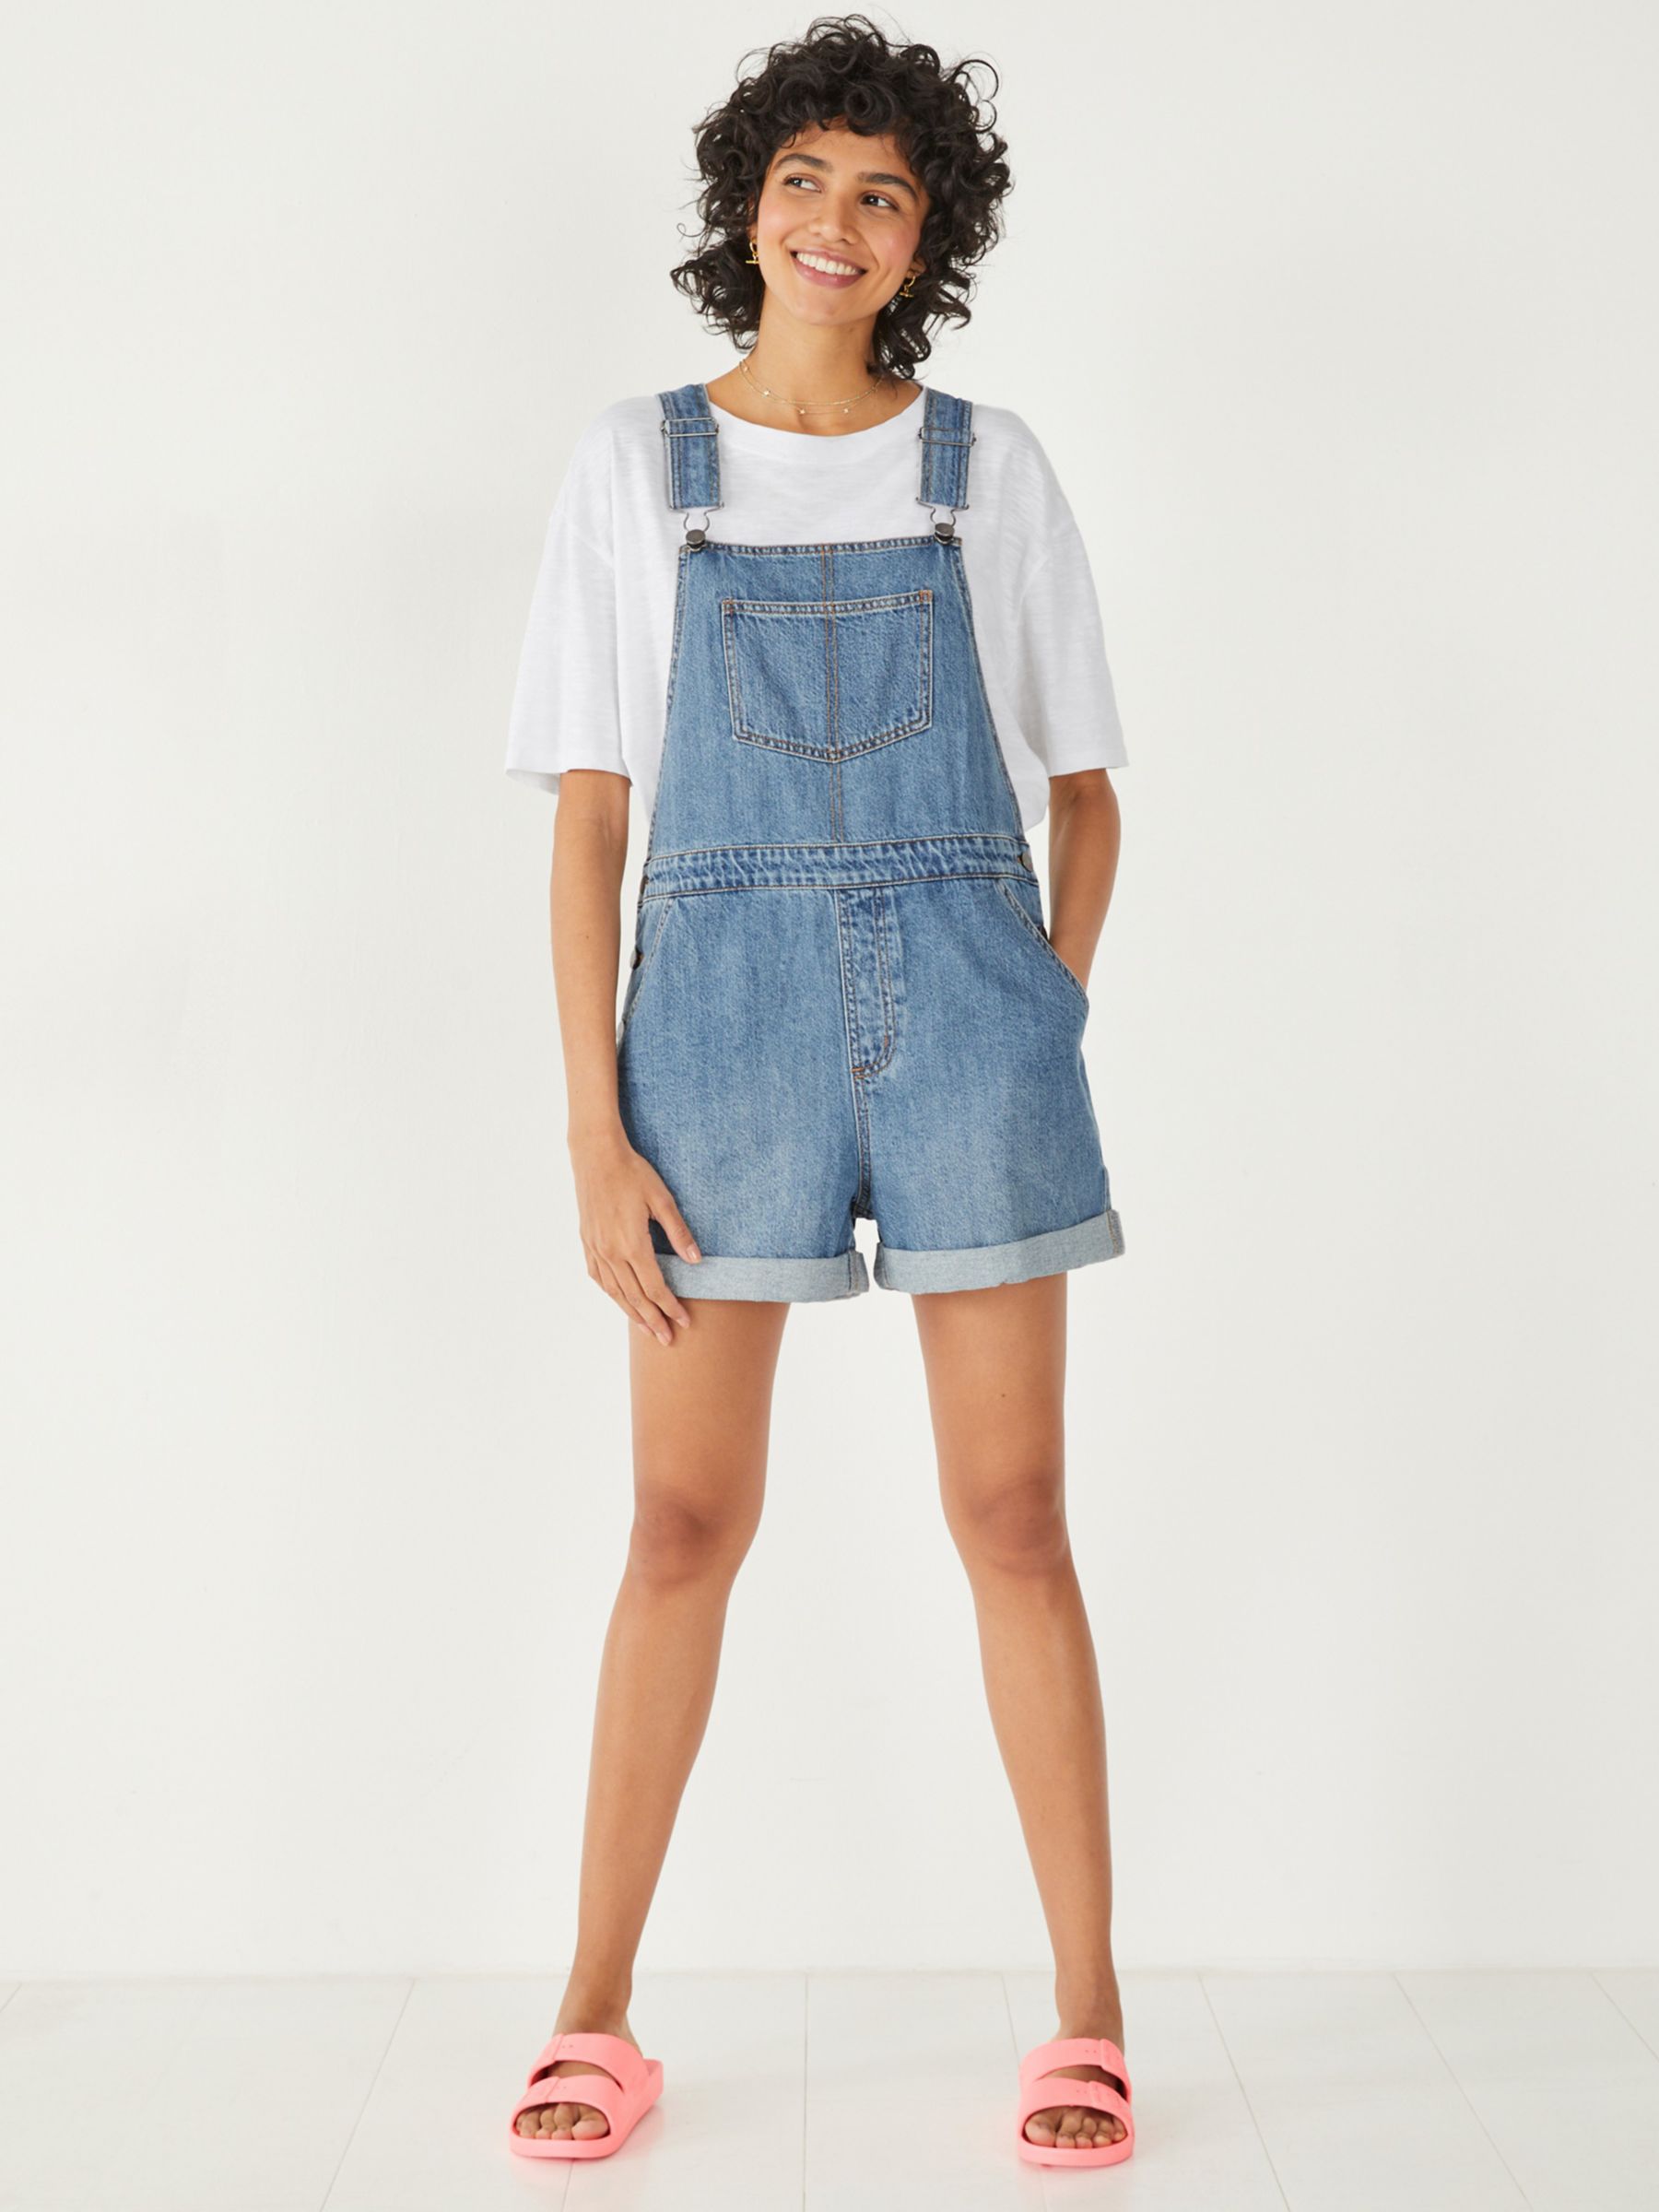 NRBY Carrie Linen Dungarees, Bright Blue